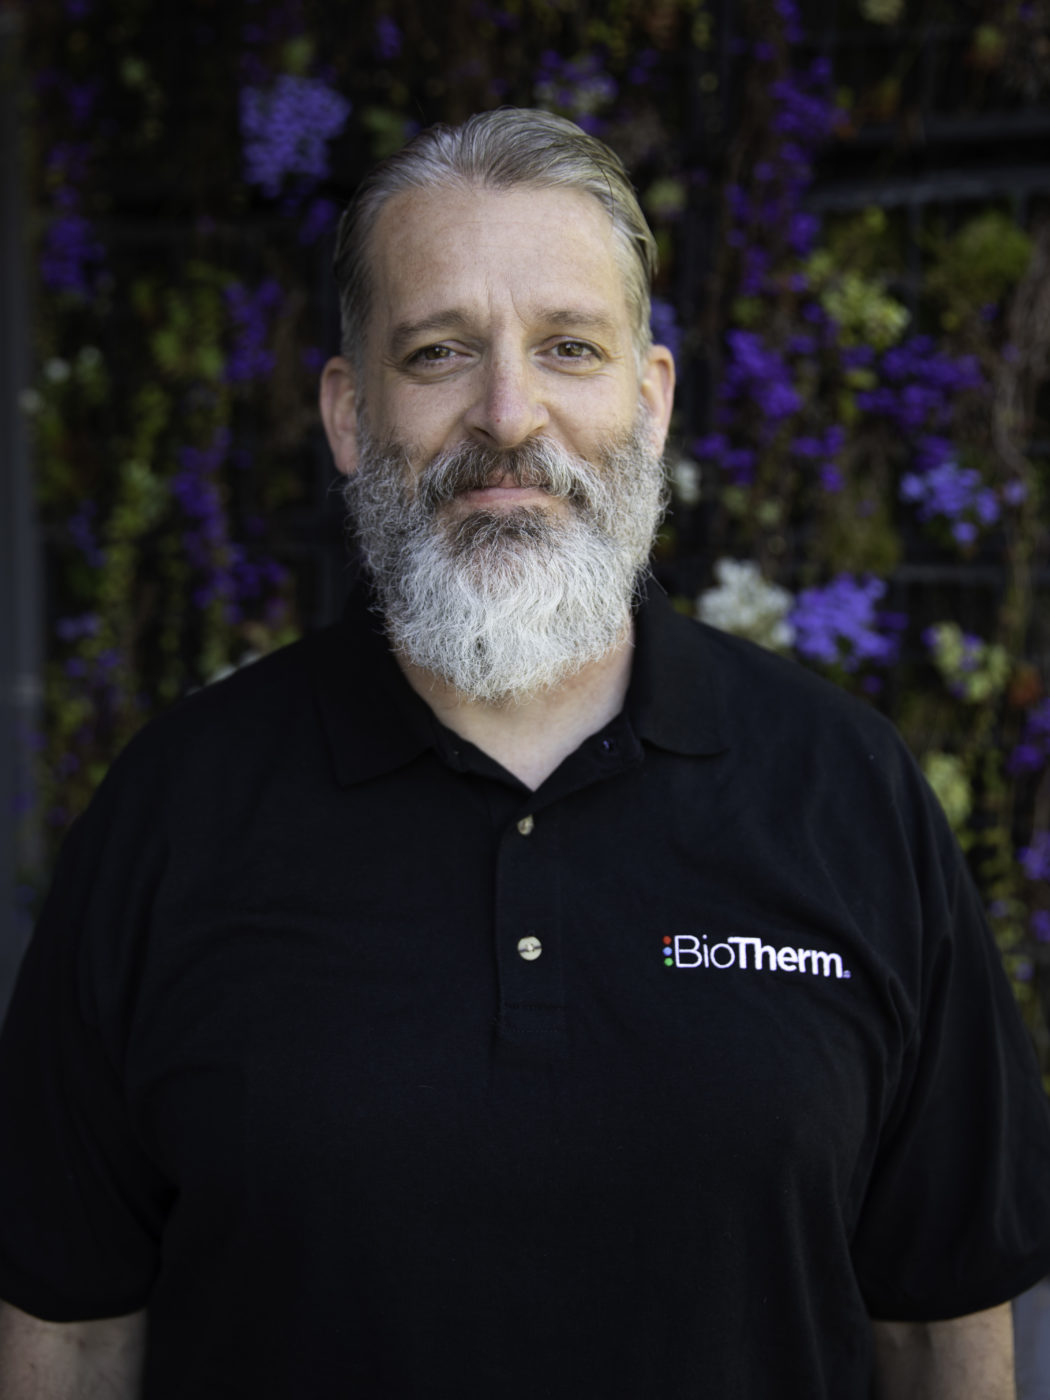 biotherm solutions staff member david coons